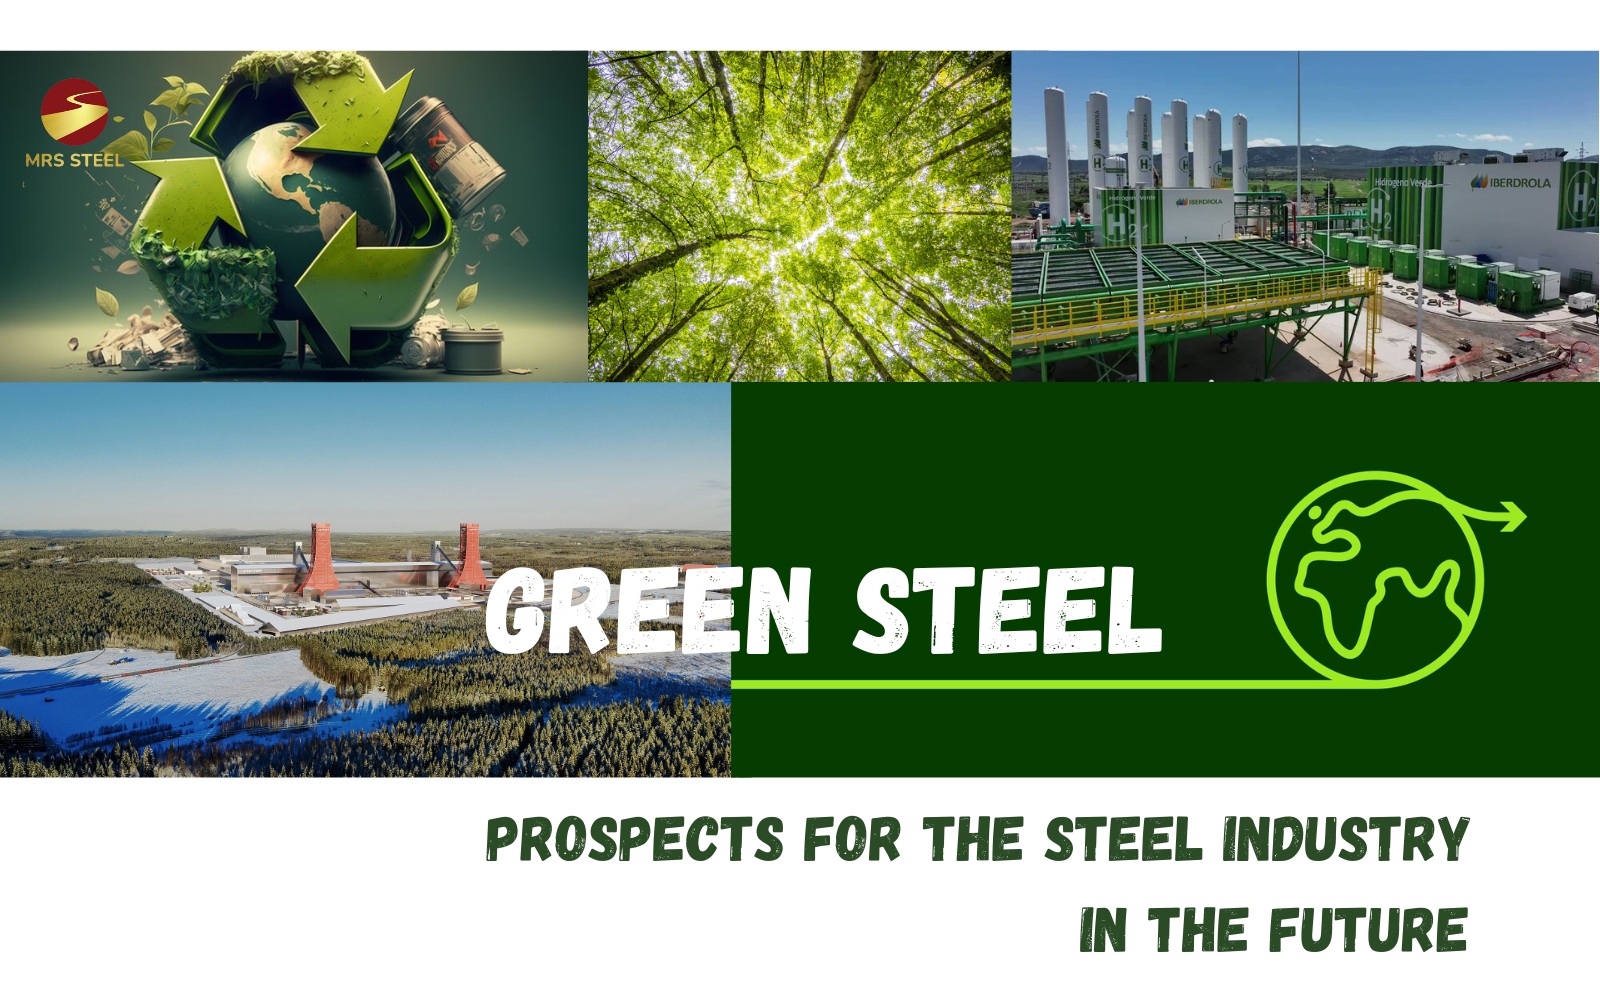 Green steel, the material that will transform the steel industry - Iberdrola